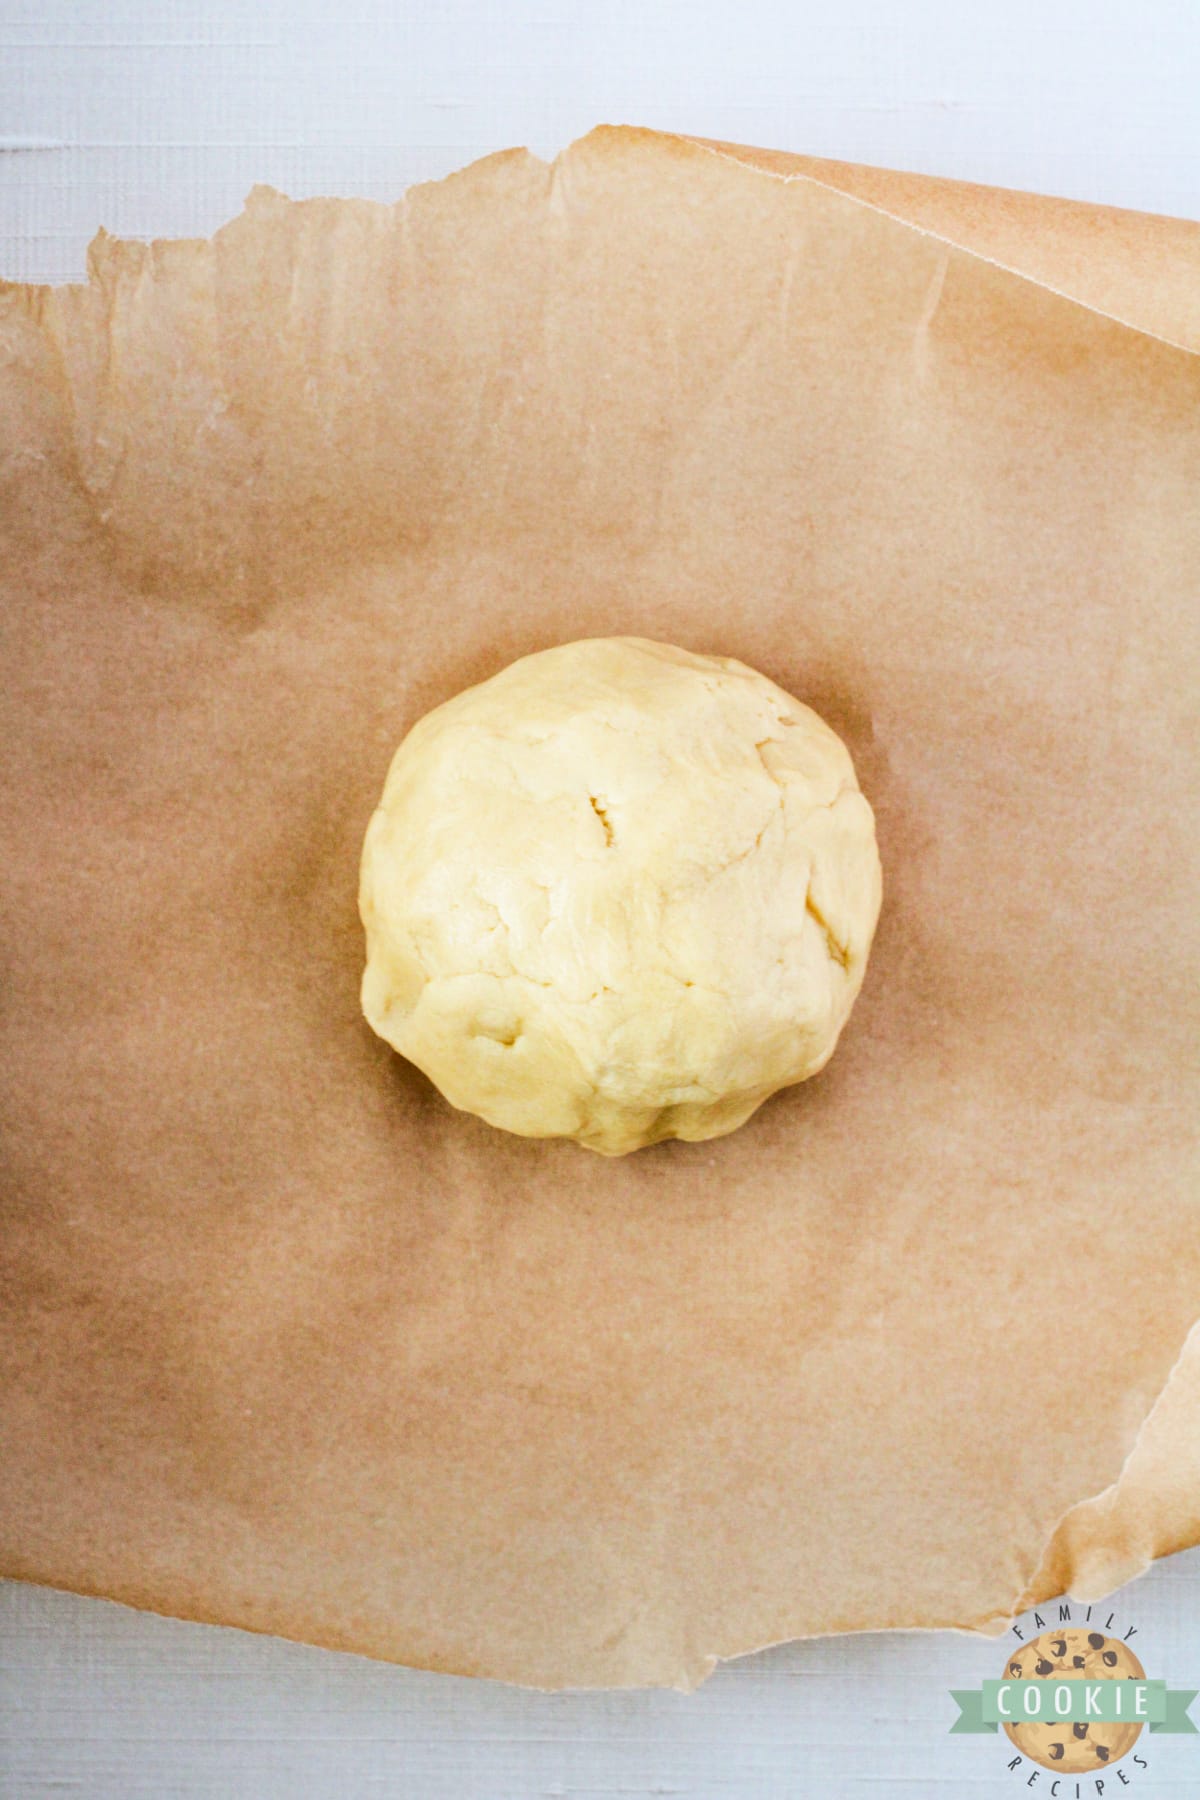 Roll up dough to refrigerate. 